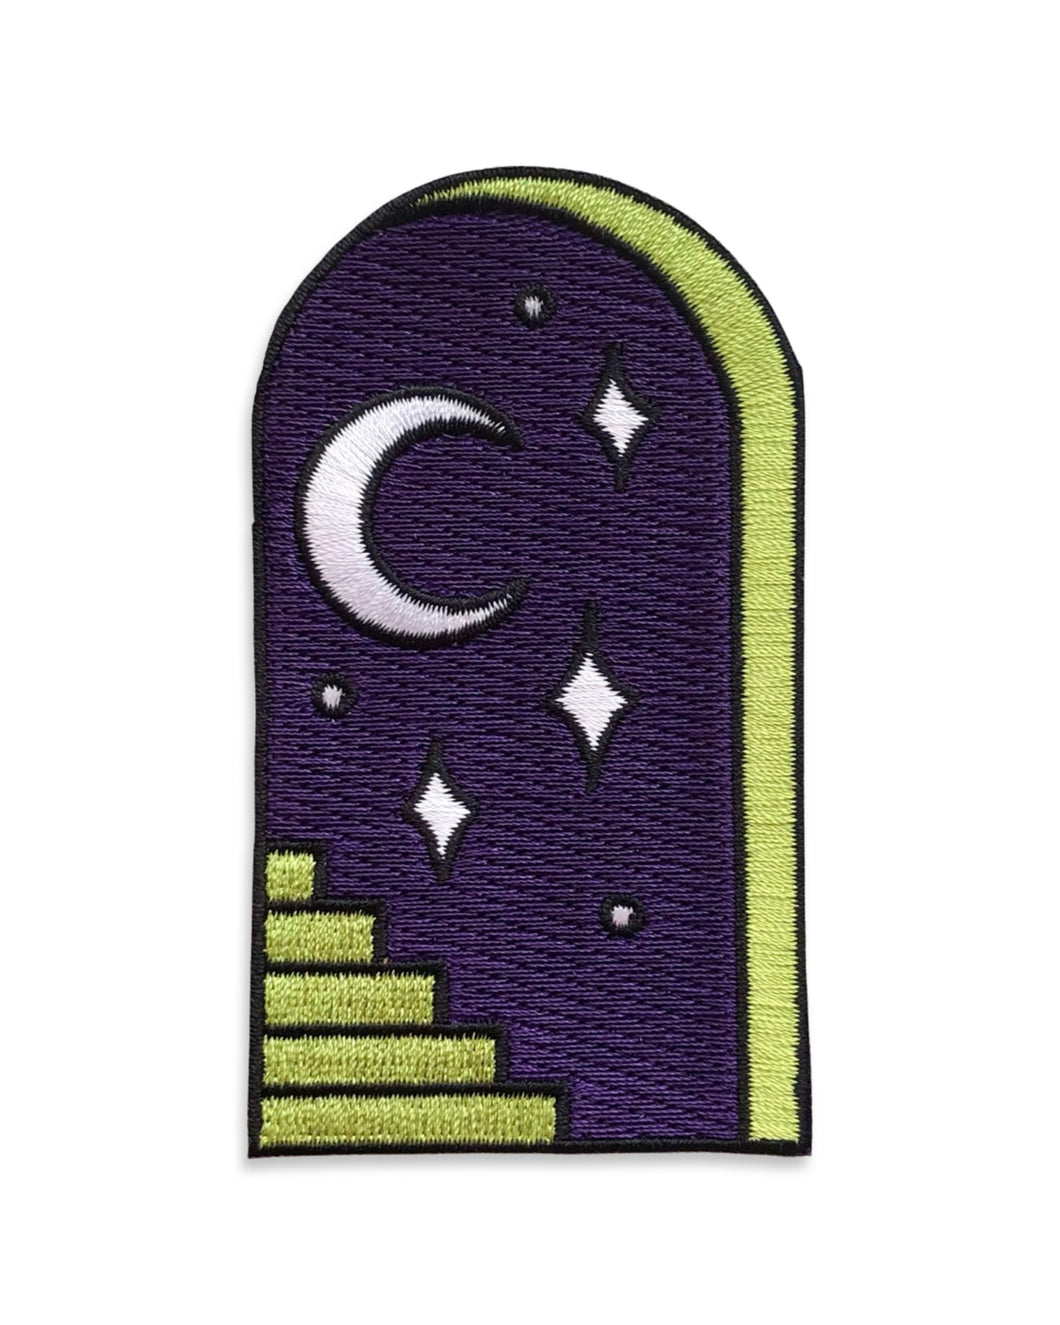 Moon Portal Iron-On Embroidered Patch